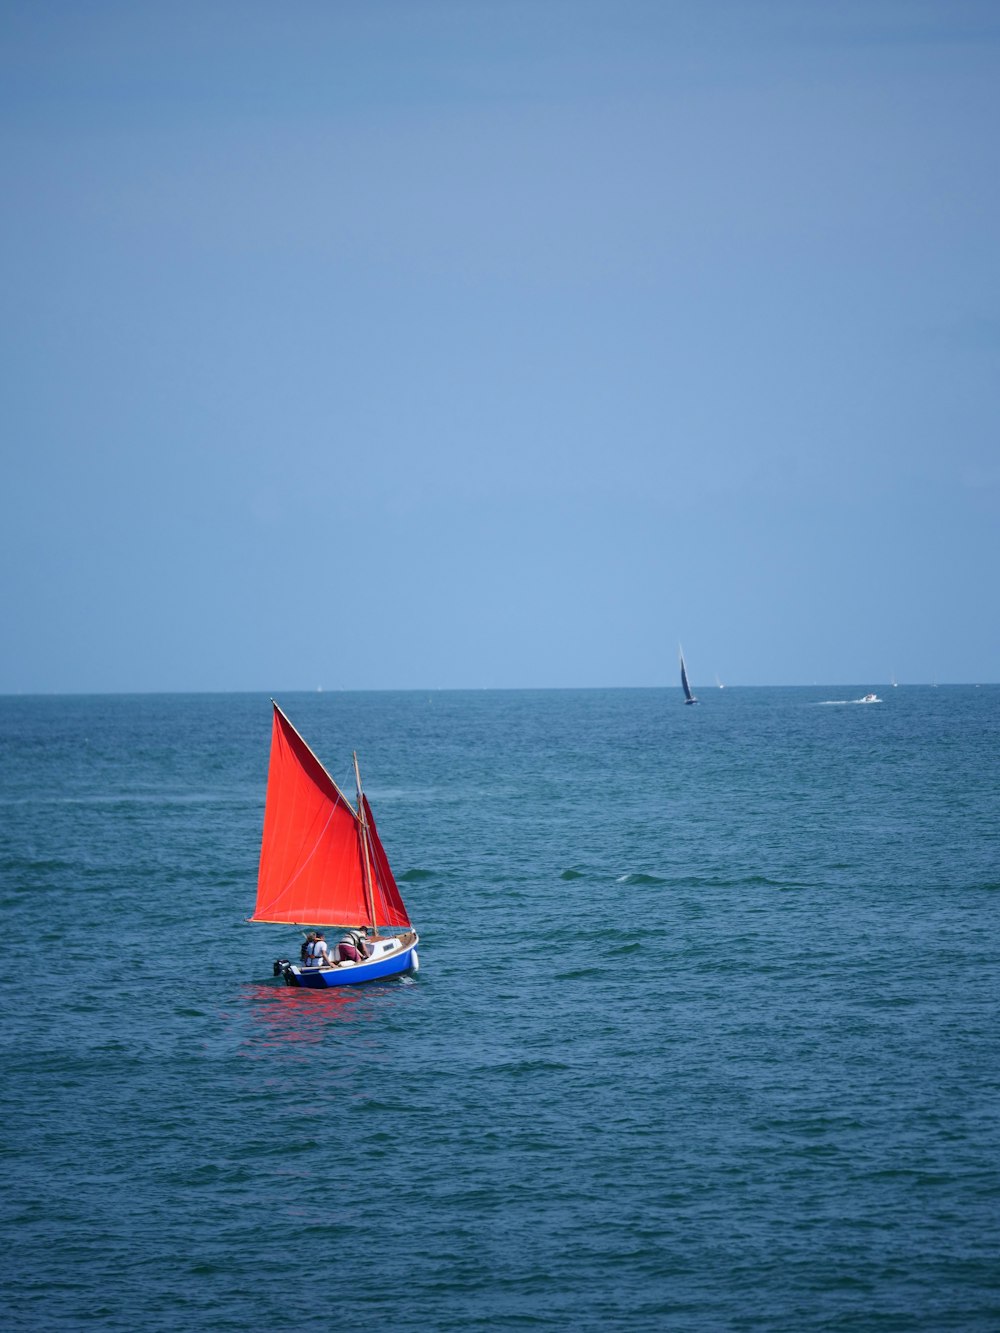 a red sailboat in the middle of the ocean